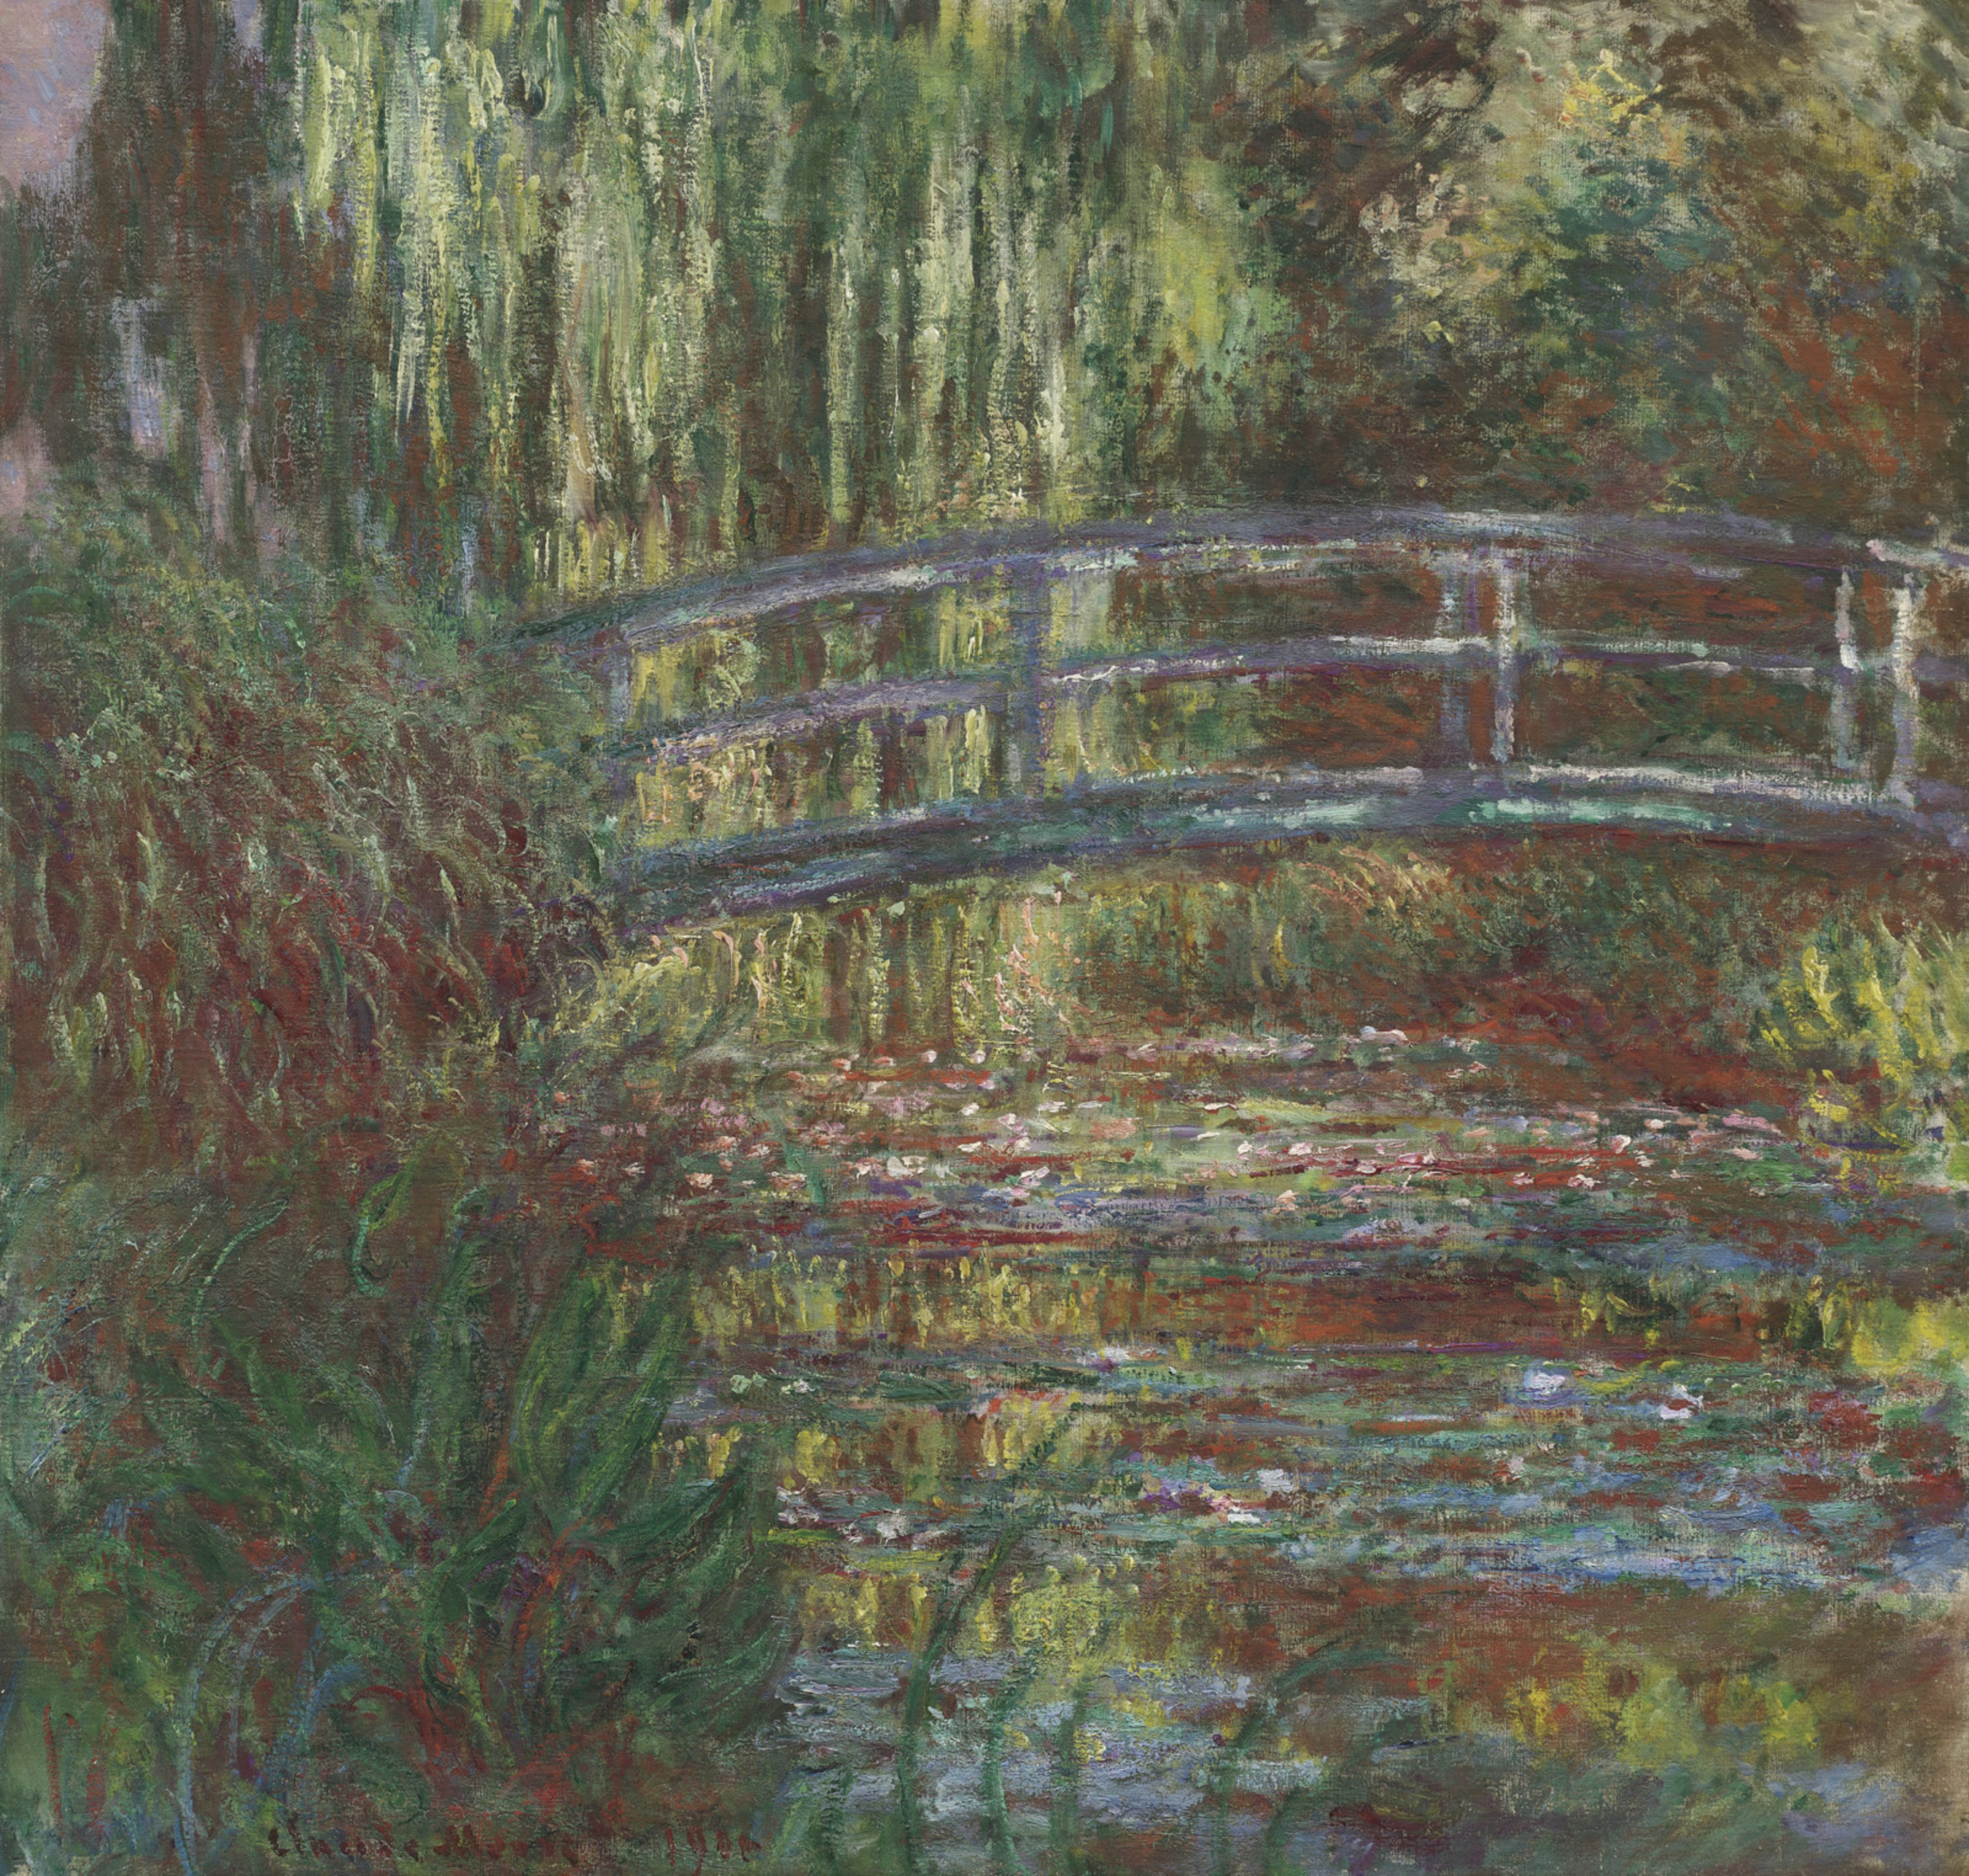 The water lily pond, 1900, by Claude Monet (French, 1840-1926). Oil on canvas. Museum of Fine Arts, Boston, Given in memory of Governor Alvan T. Fuller by the Fuller Foundation, 61.959. Photograph, 2015, MFA, Boston.